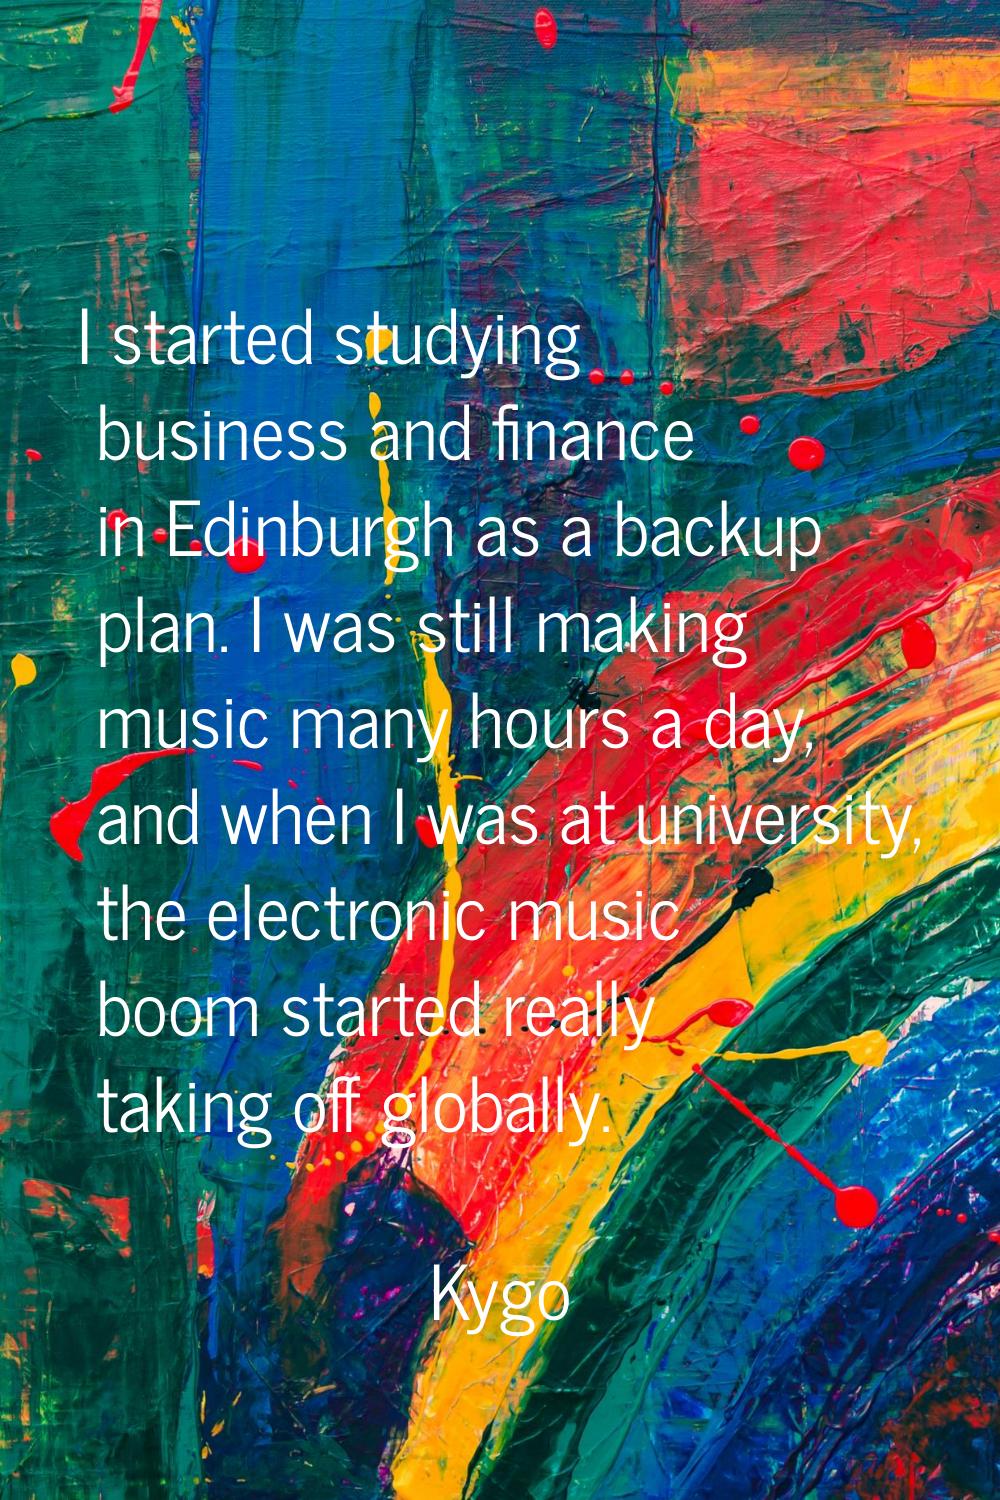 I started studying business and finance in Edinburgh as a backup plan. I was still making music man